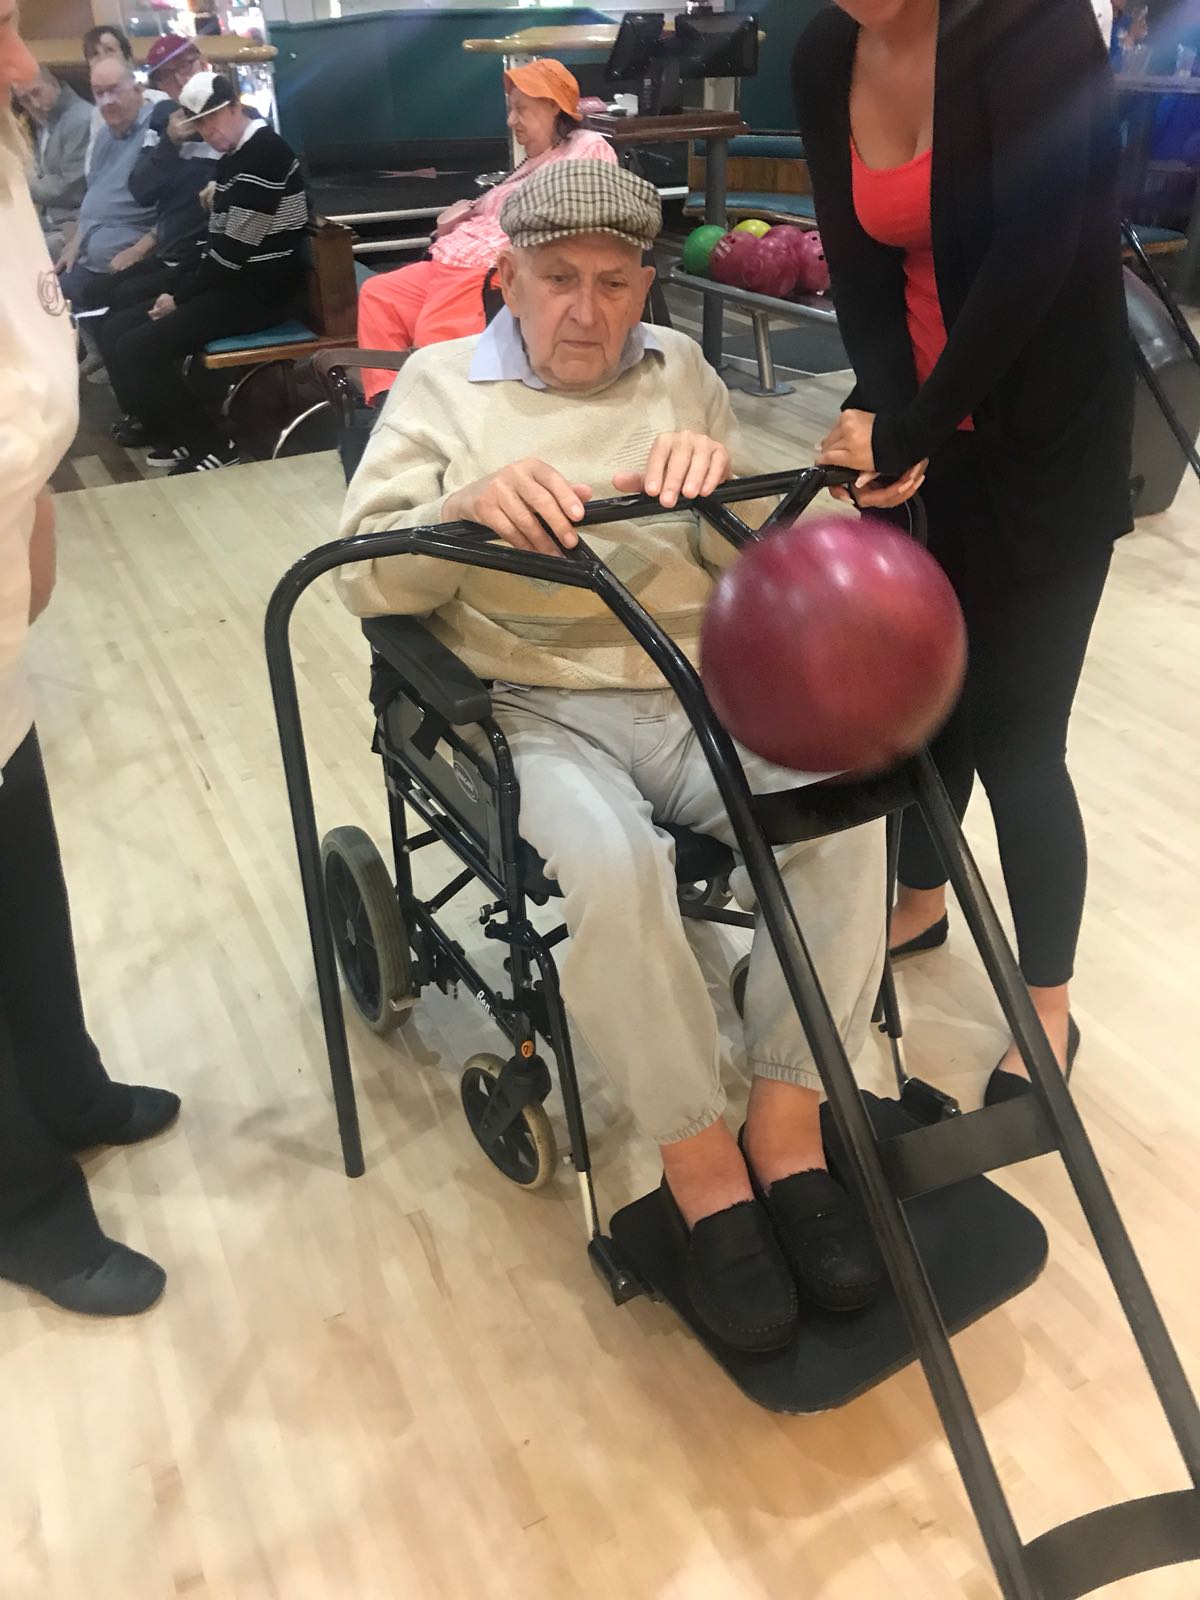 Bowling 2018: Key Healthcare is dedicated to caring for elderly residents in safe. We have multiple dementia care homes including our care home middlesbrough, our care home St. Helen and care home saltburn. We excel in monitoring and improving care levels.